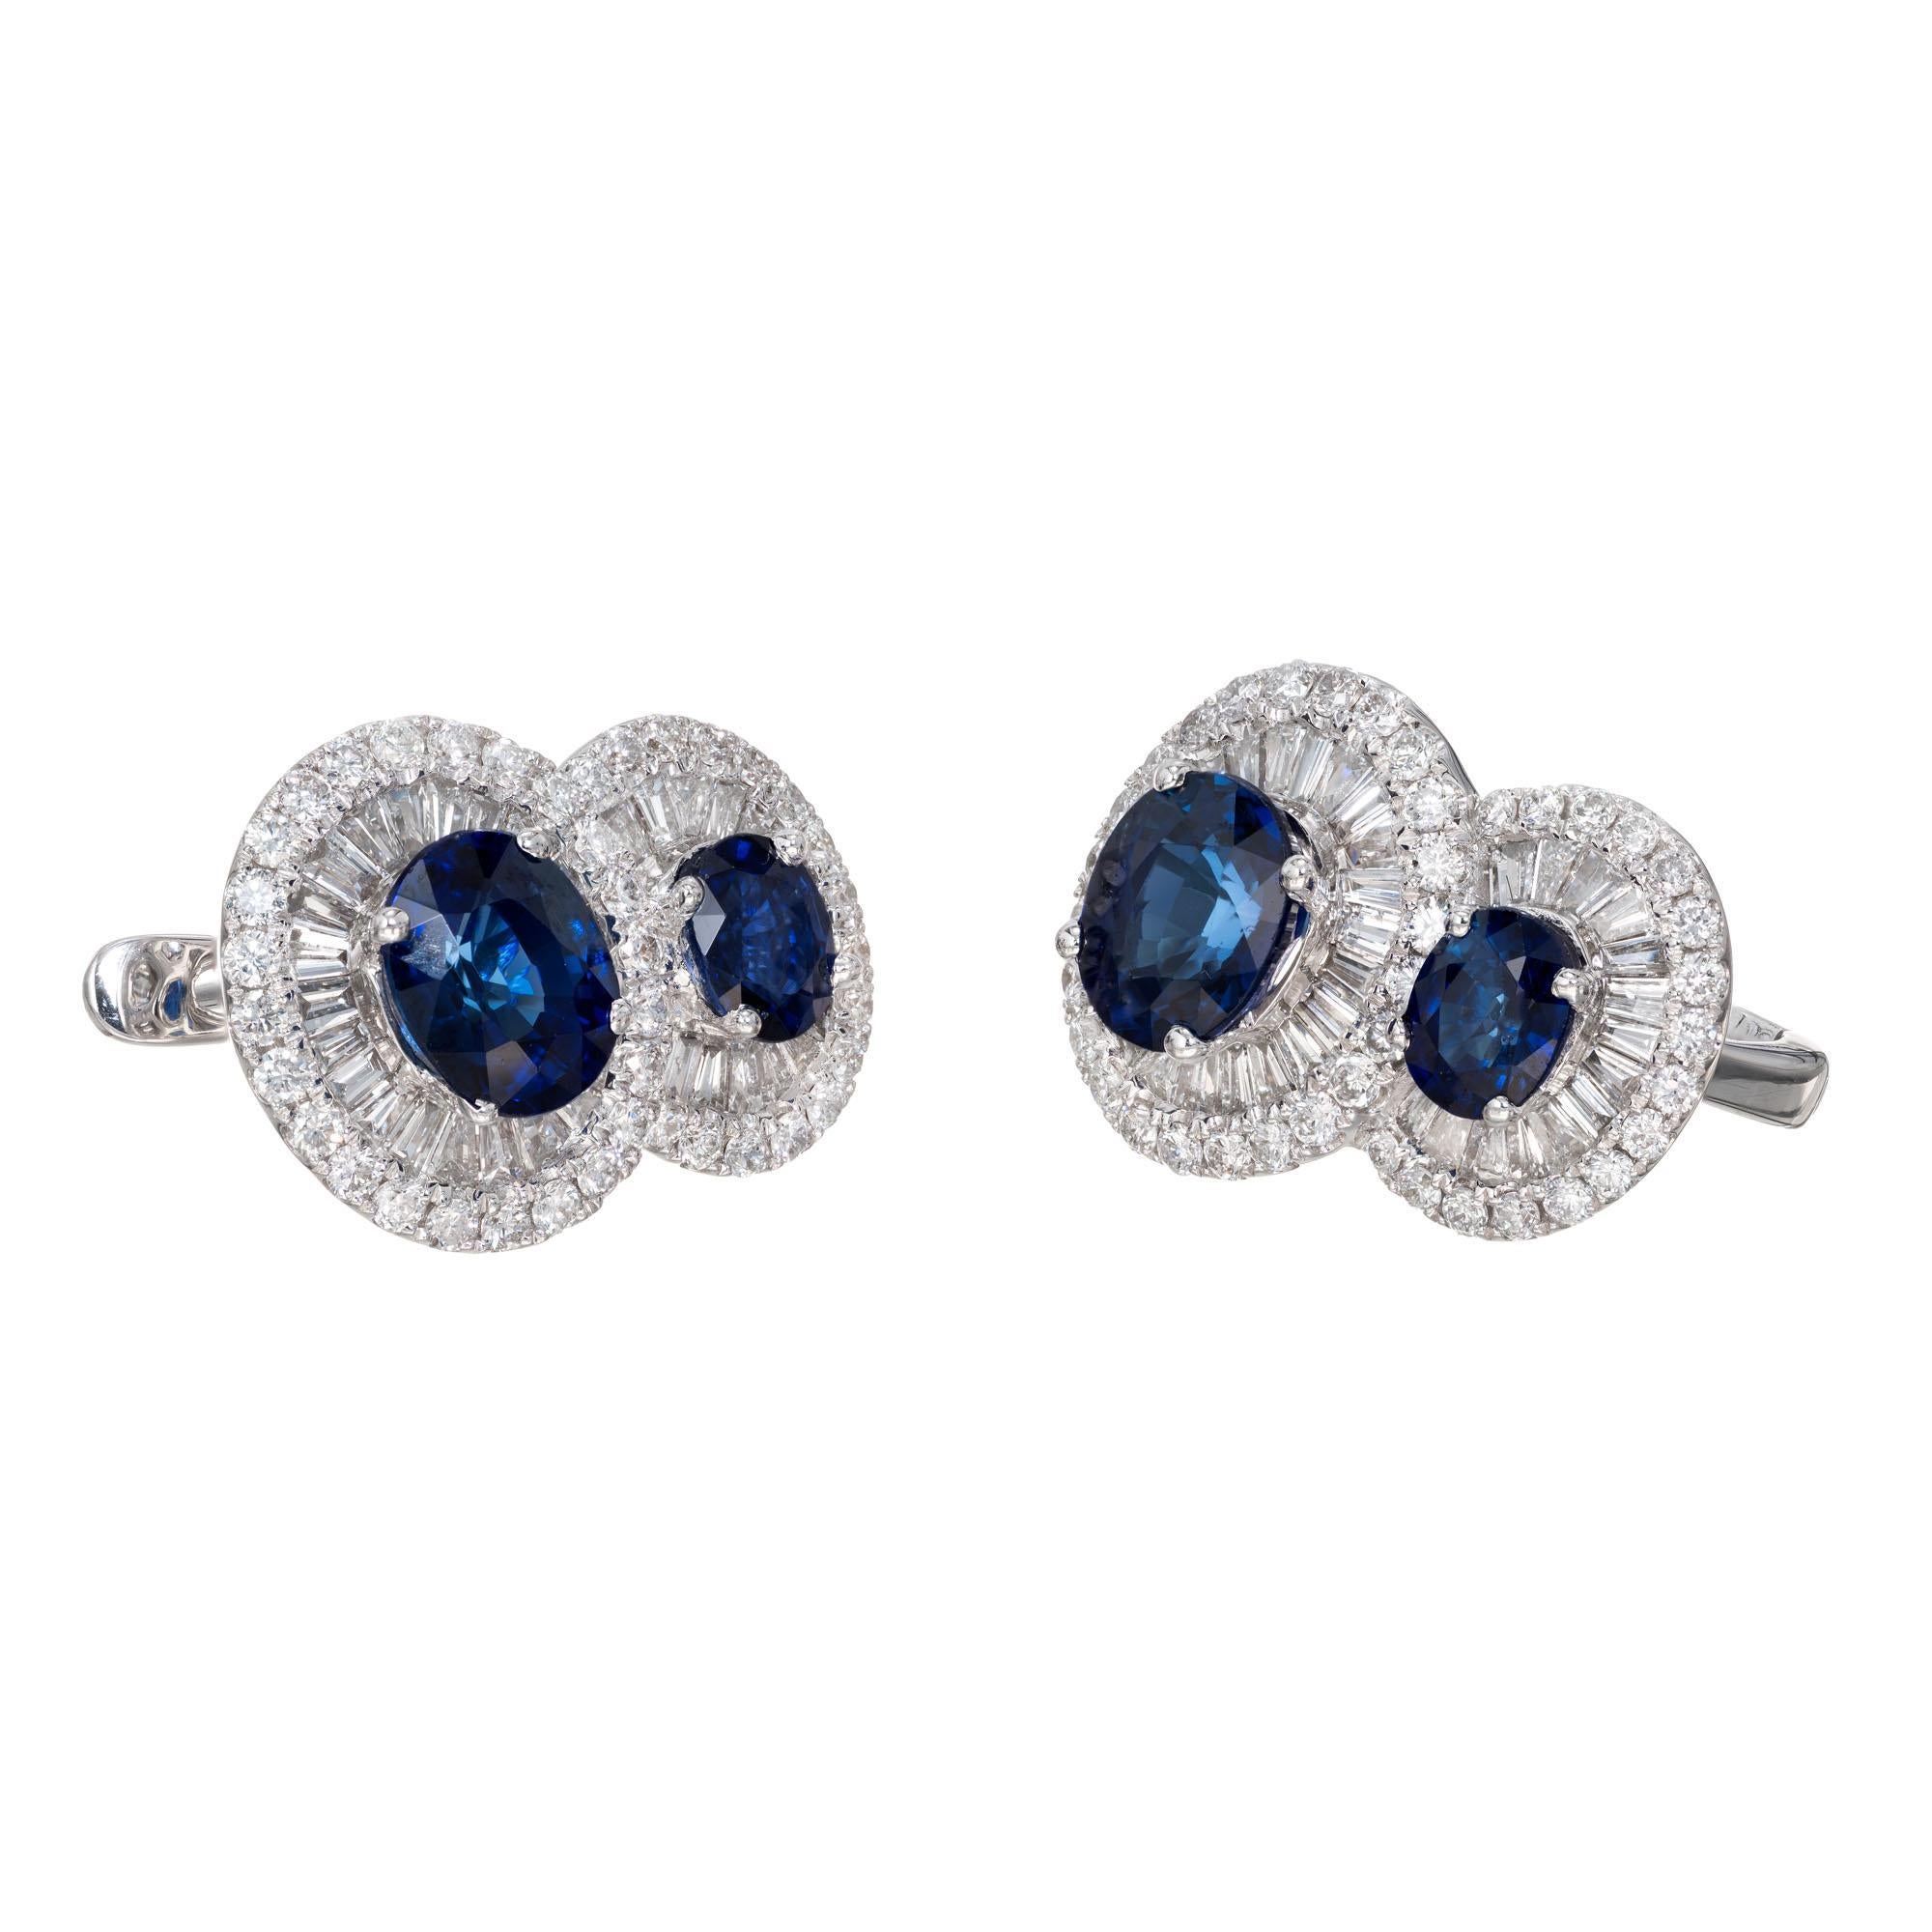 Mid-century Royal blue Sapphire and diamond earrings.  18k white gold lever back settings, 4 oval sapphires with halos of round and baguette diamonds. 

4 oval gem Royal blue Sapphires, approx. total weight 2.43cts, VS, natural corundum, simple heat